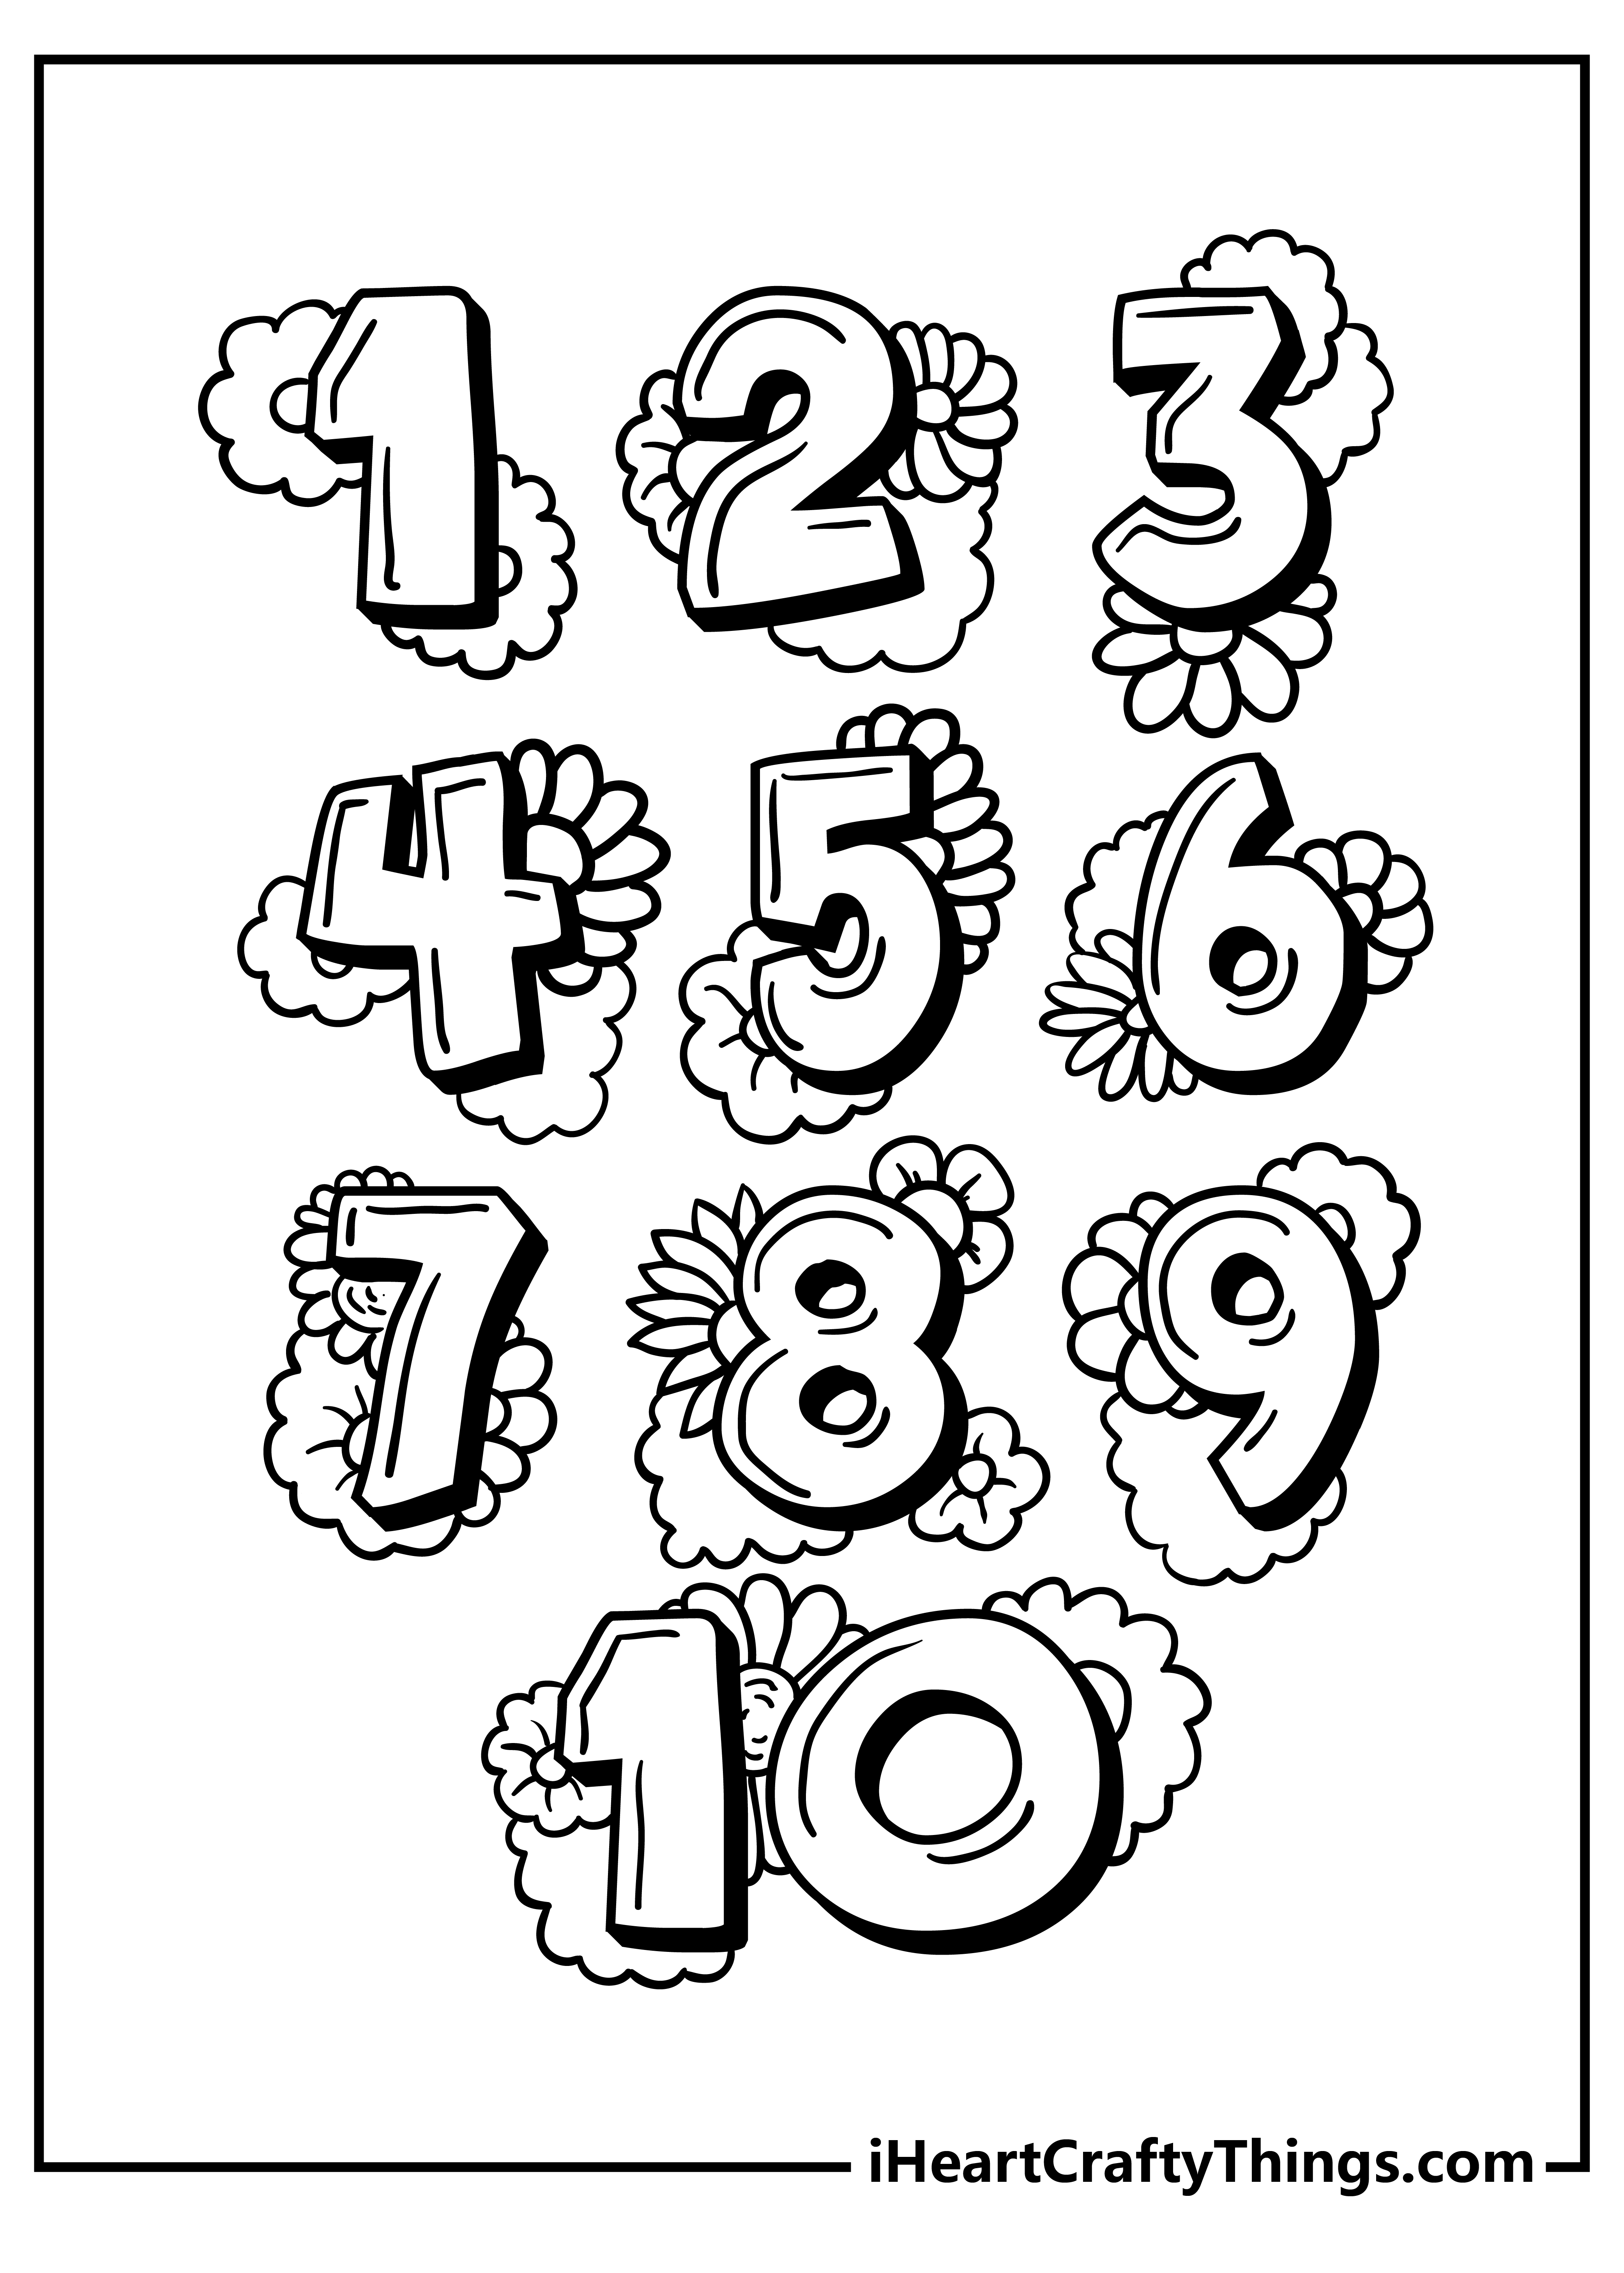 Number Coloring Pages for kids free download